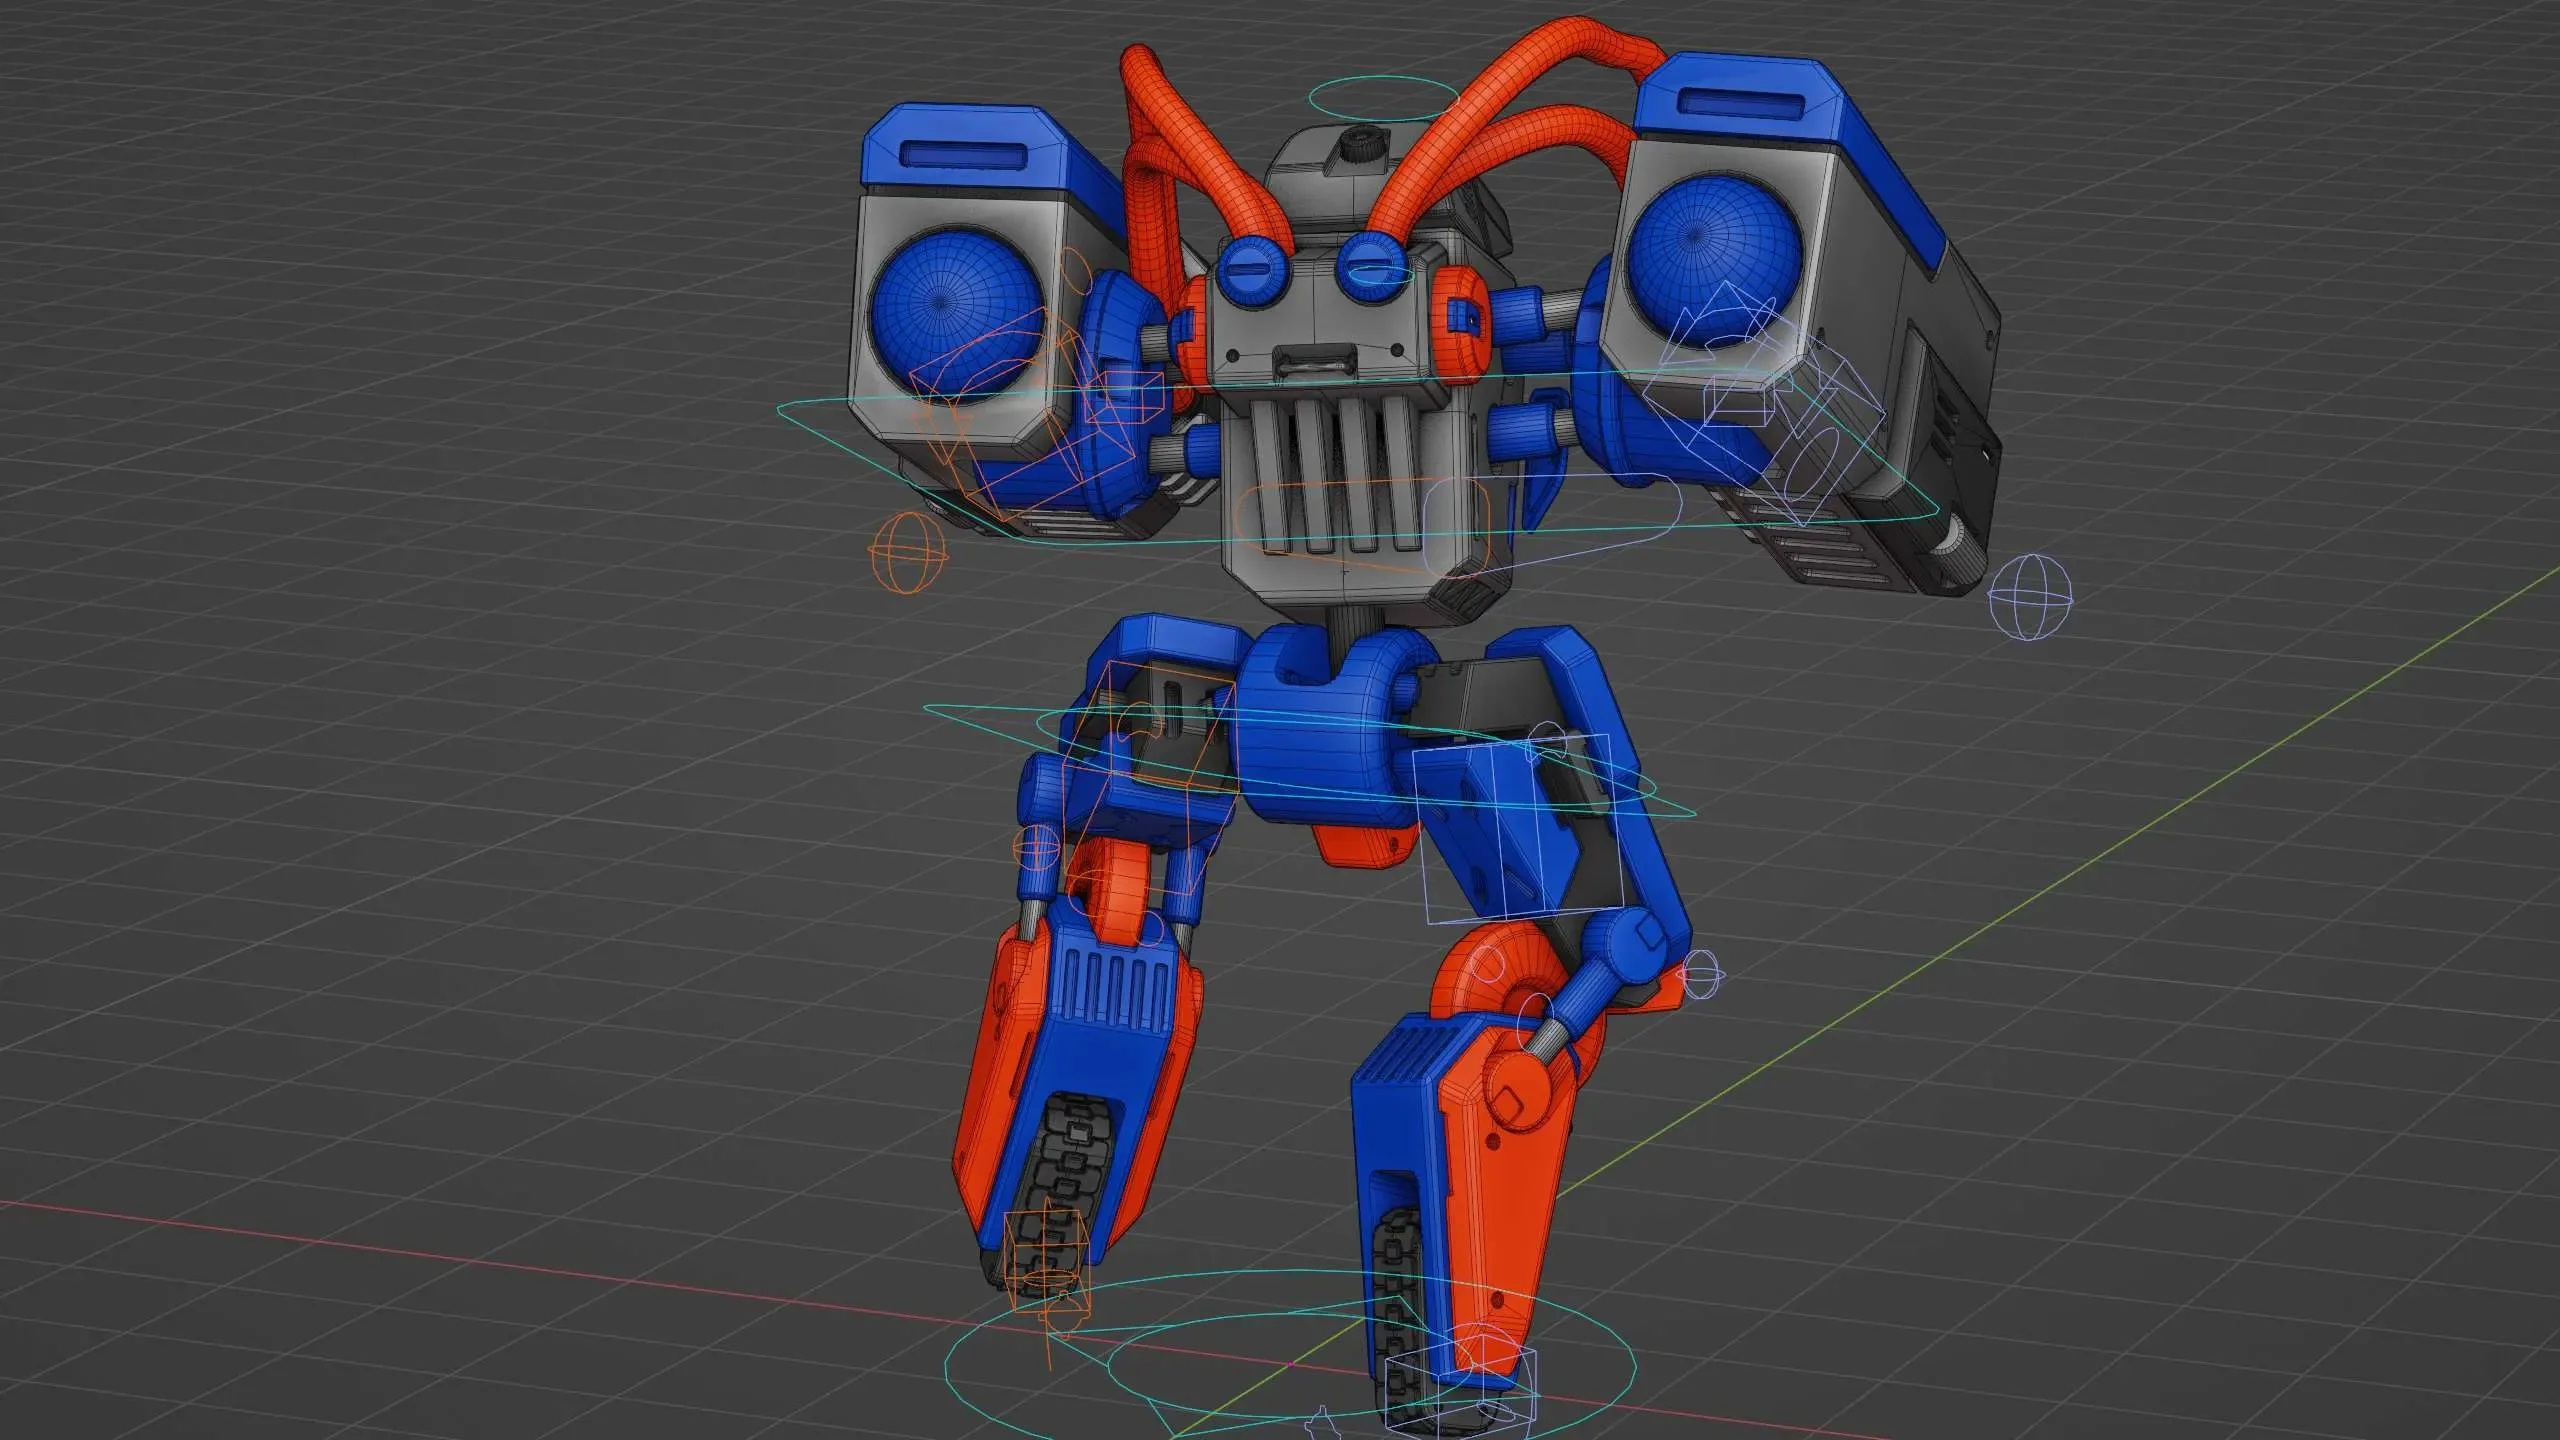 Military Bot B-450 Auto-Rig Pro Rigged For Mixamo, Unreal Engine Unity